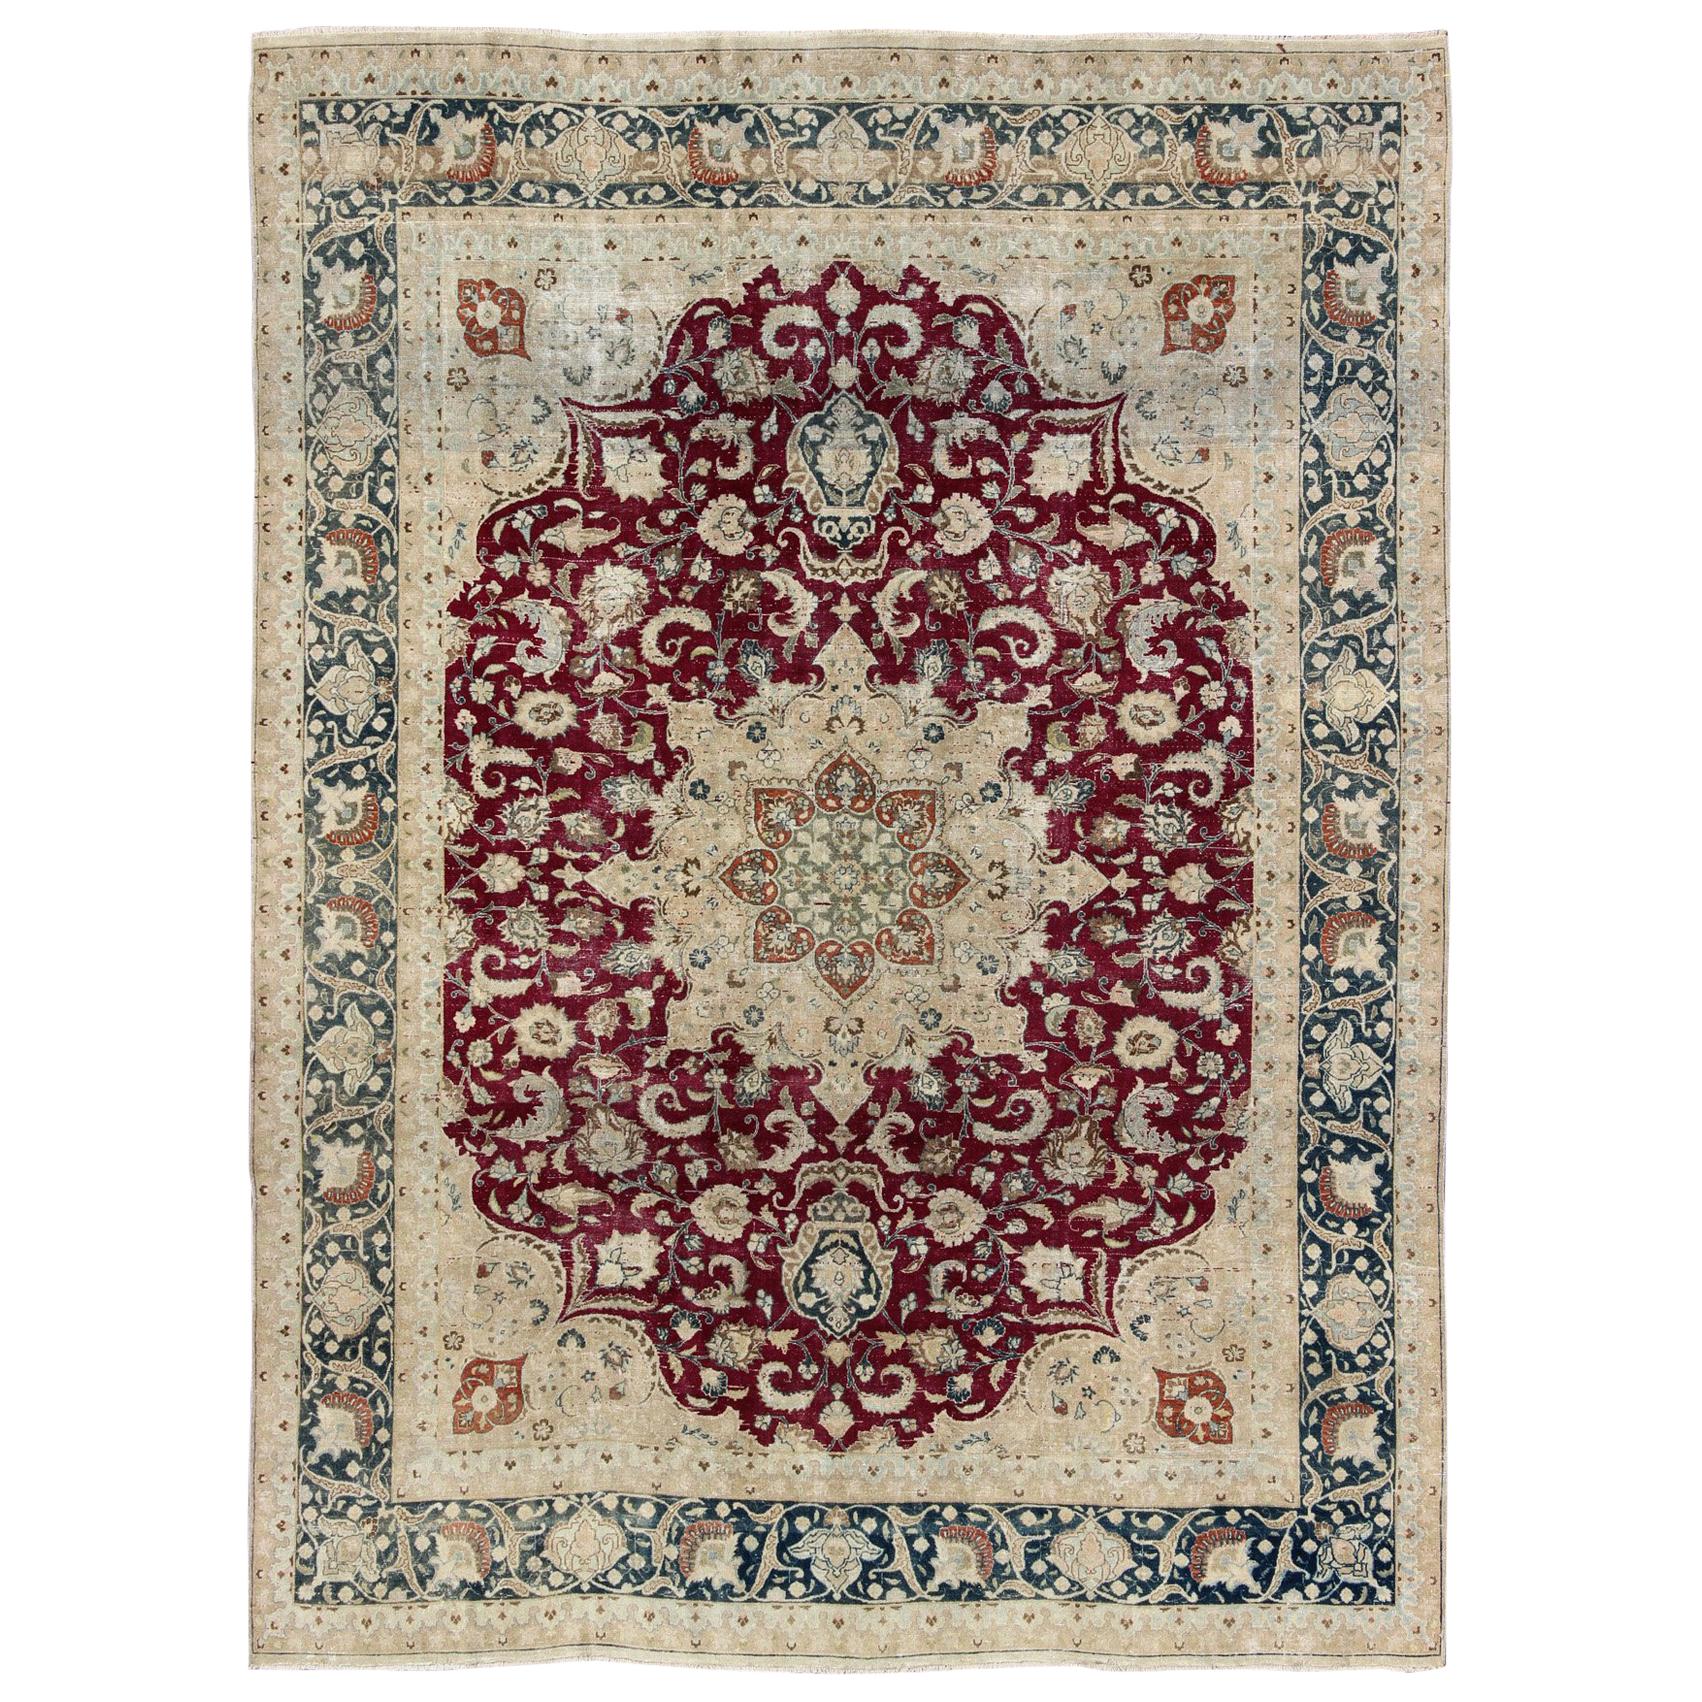 Layered Floral Medallion Antique Persian Mashad Rug in Red, Steel Blue and Cream